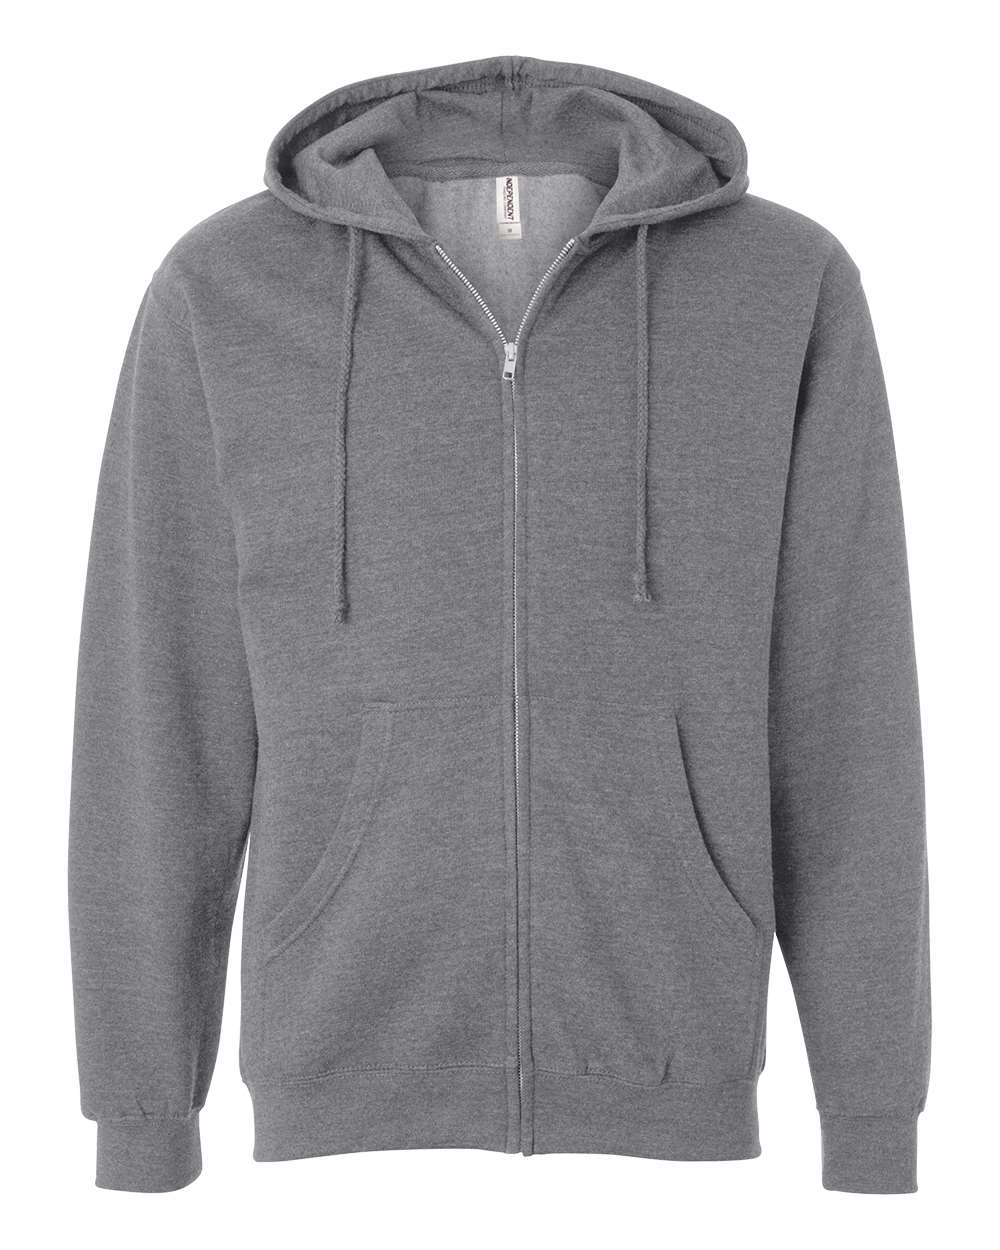 Independent Trading Co. Midweight Full-Zip Hooded Sweatshirt SS4500Z #color_Gunmetal Heather